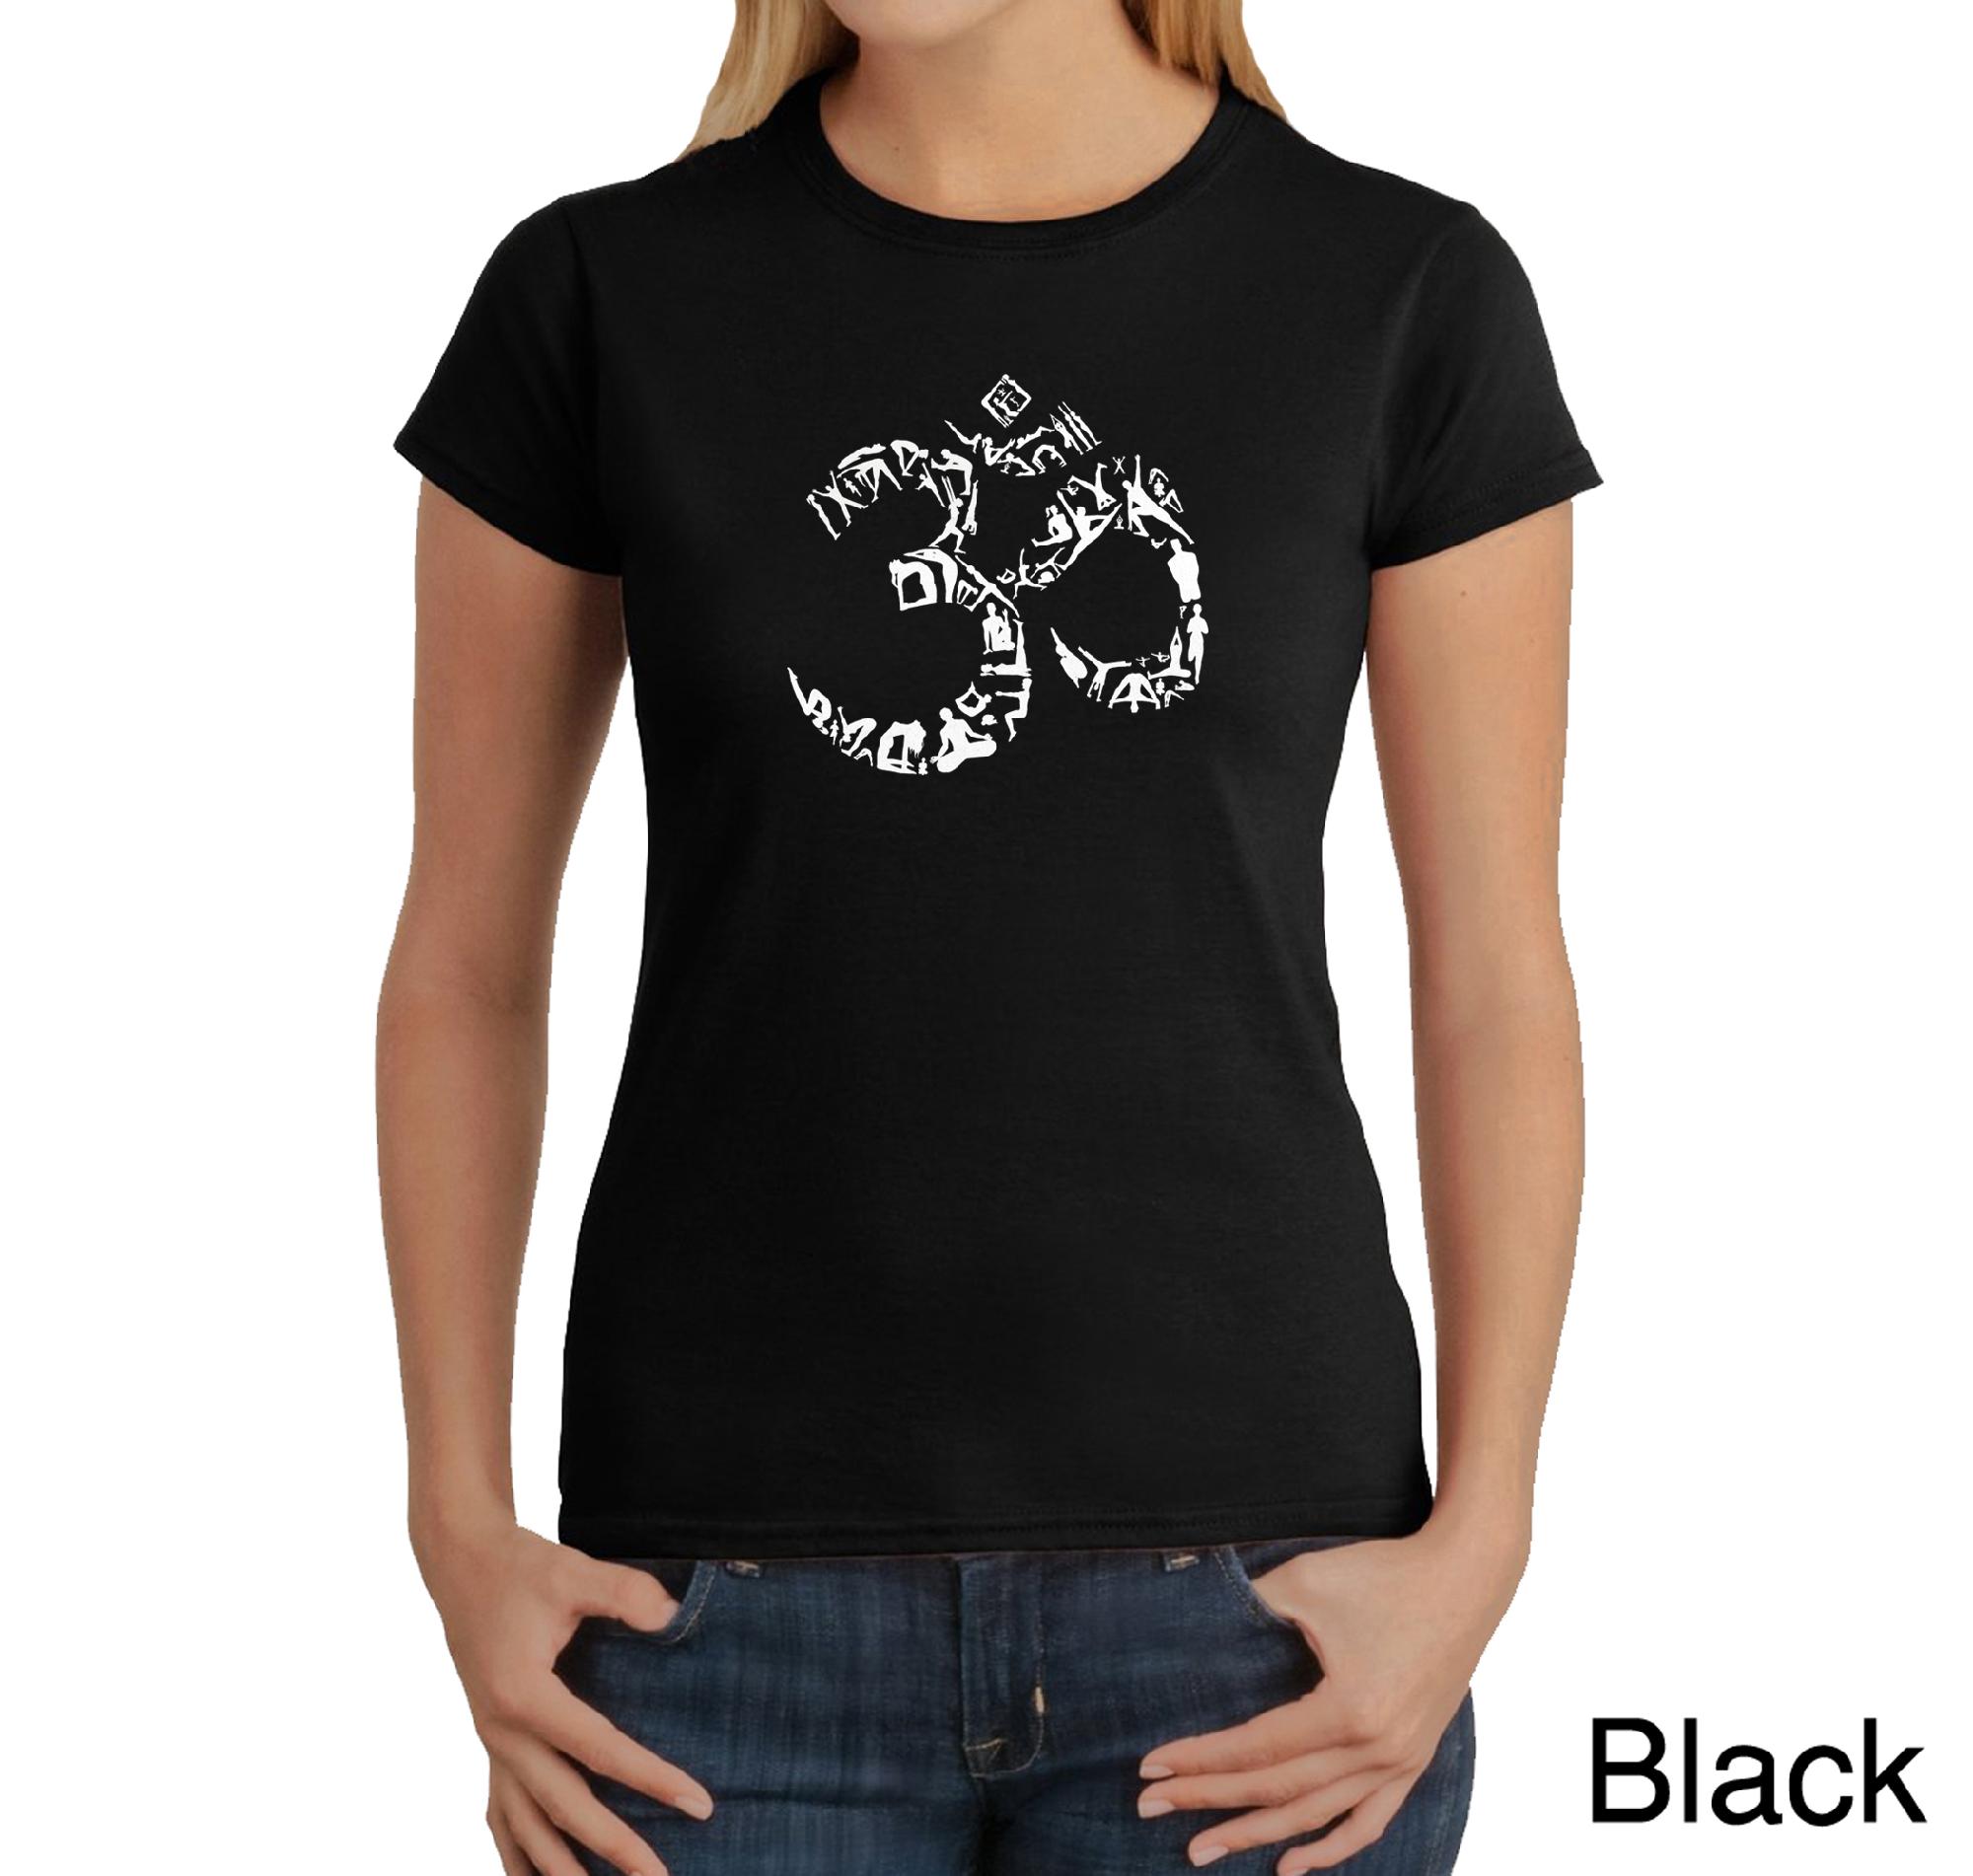 Los Angeles Pop Art Women's Word Art T-shirt - The Om Symbol out of Yoga Poses - Online Exclusive